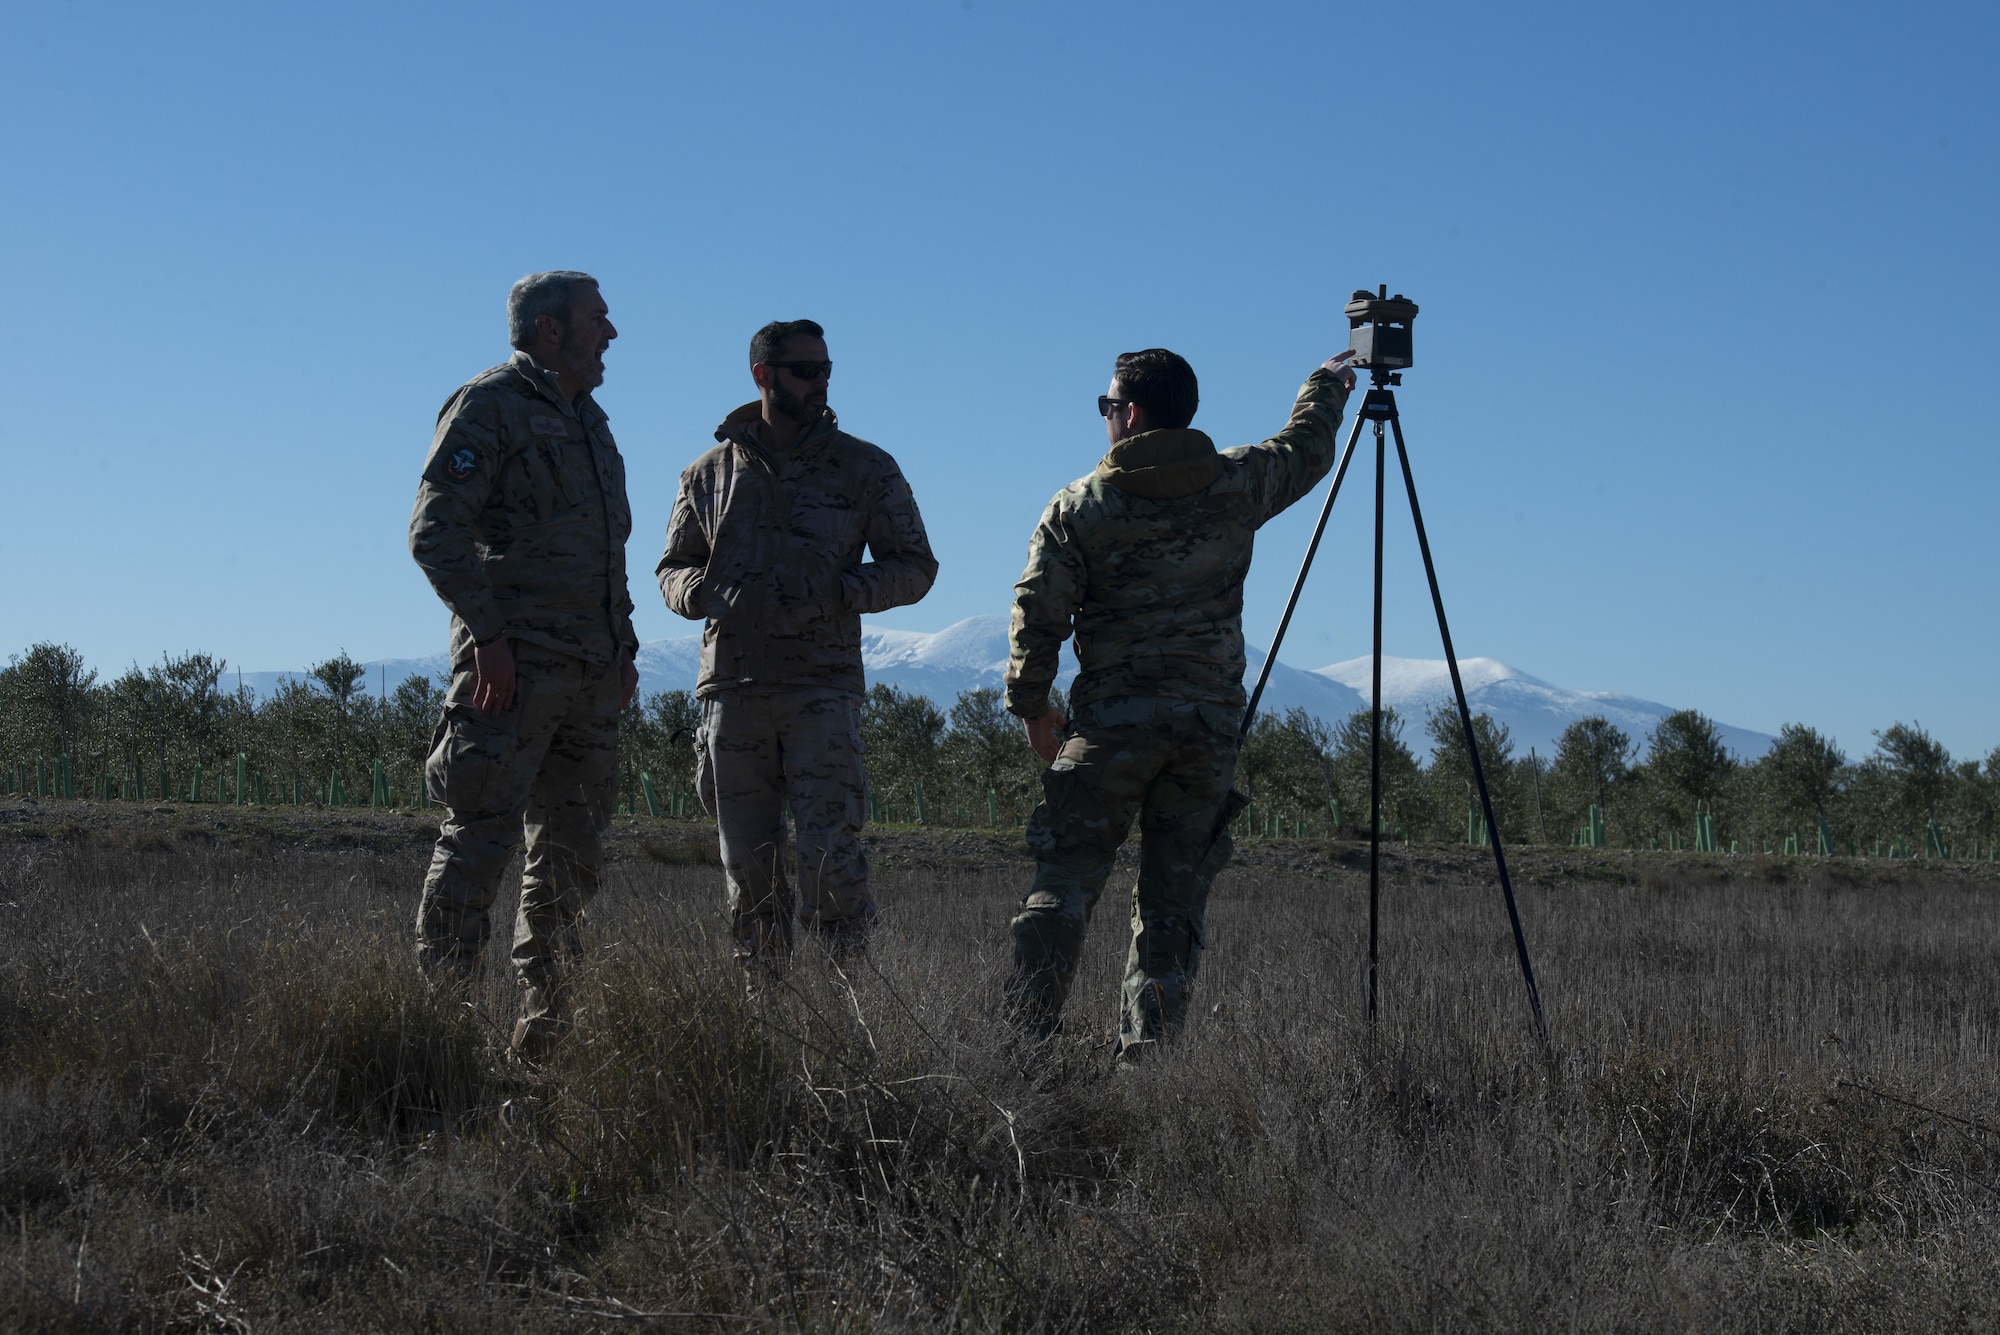 Three people are next to a tripod stand. There is a blue sky and white and grey mountains in the distance